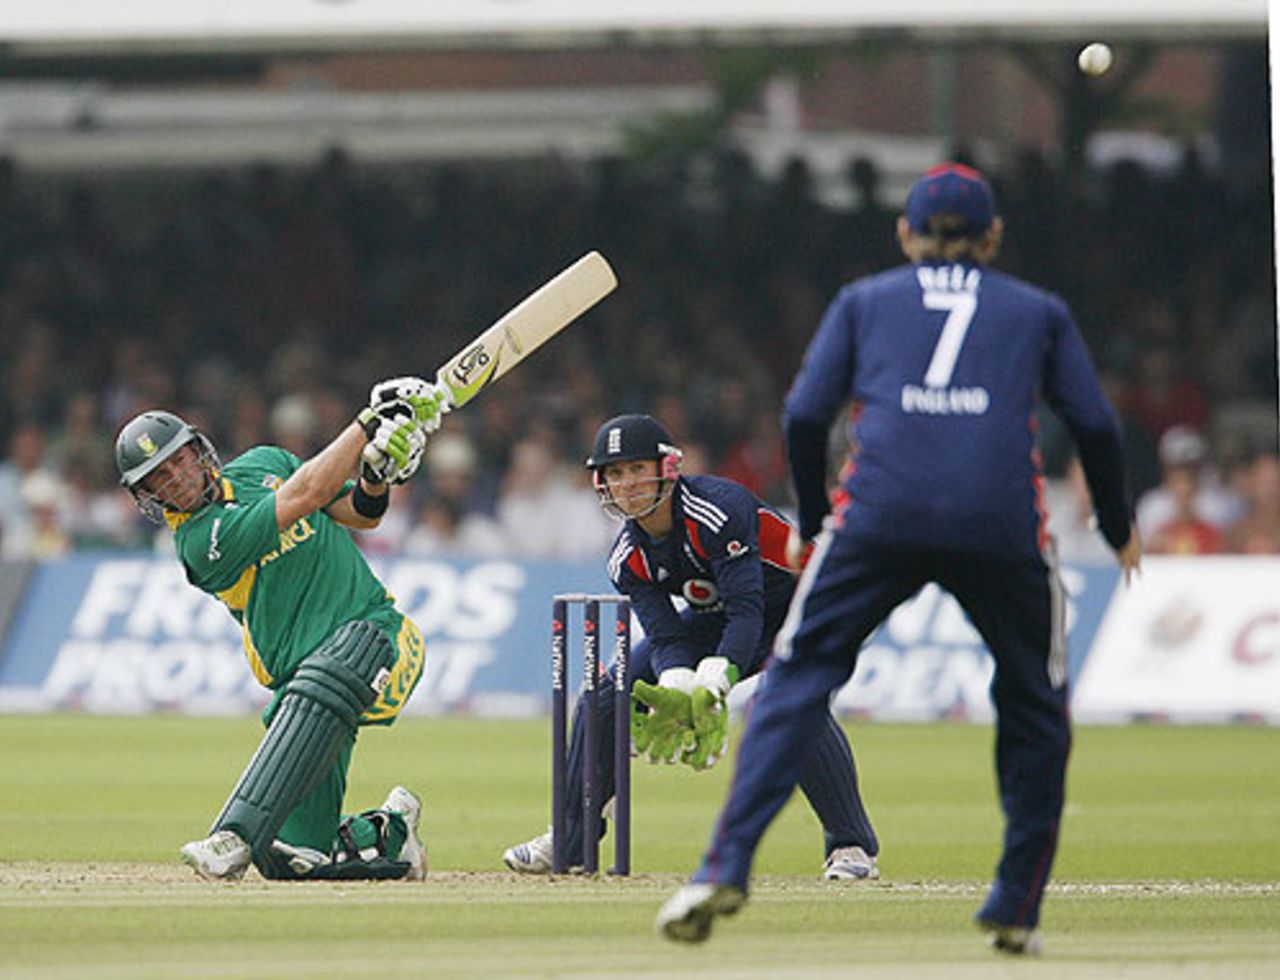 AB de Villiers takes on the leg-side boundary, England v South Africa, 4th ODI, Lord's, August 31, 2008